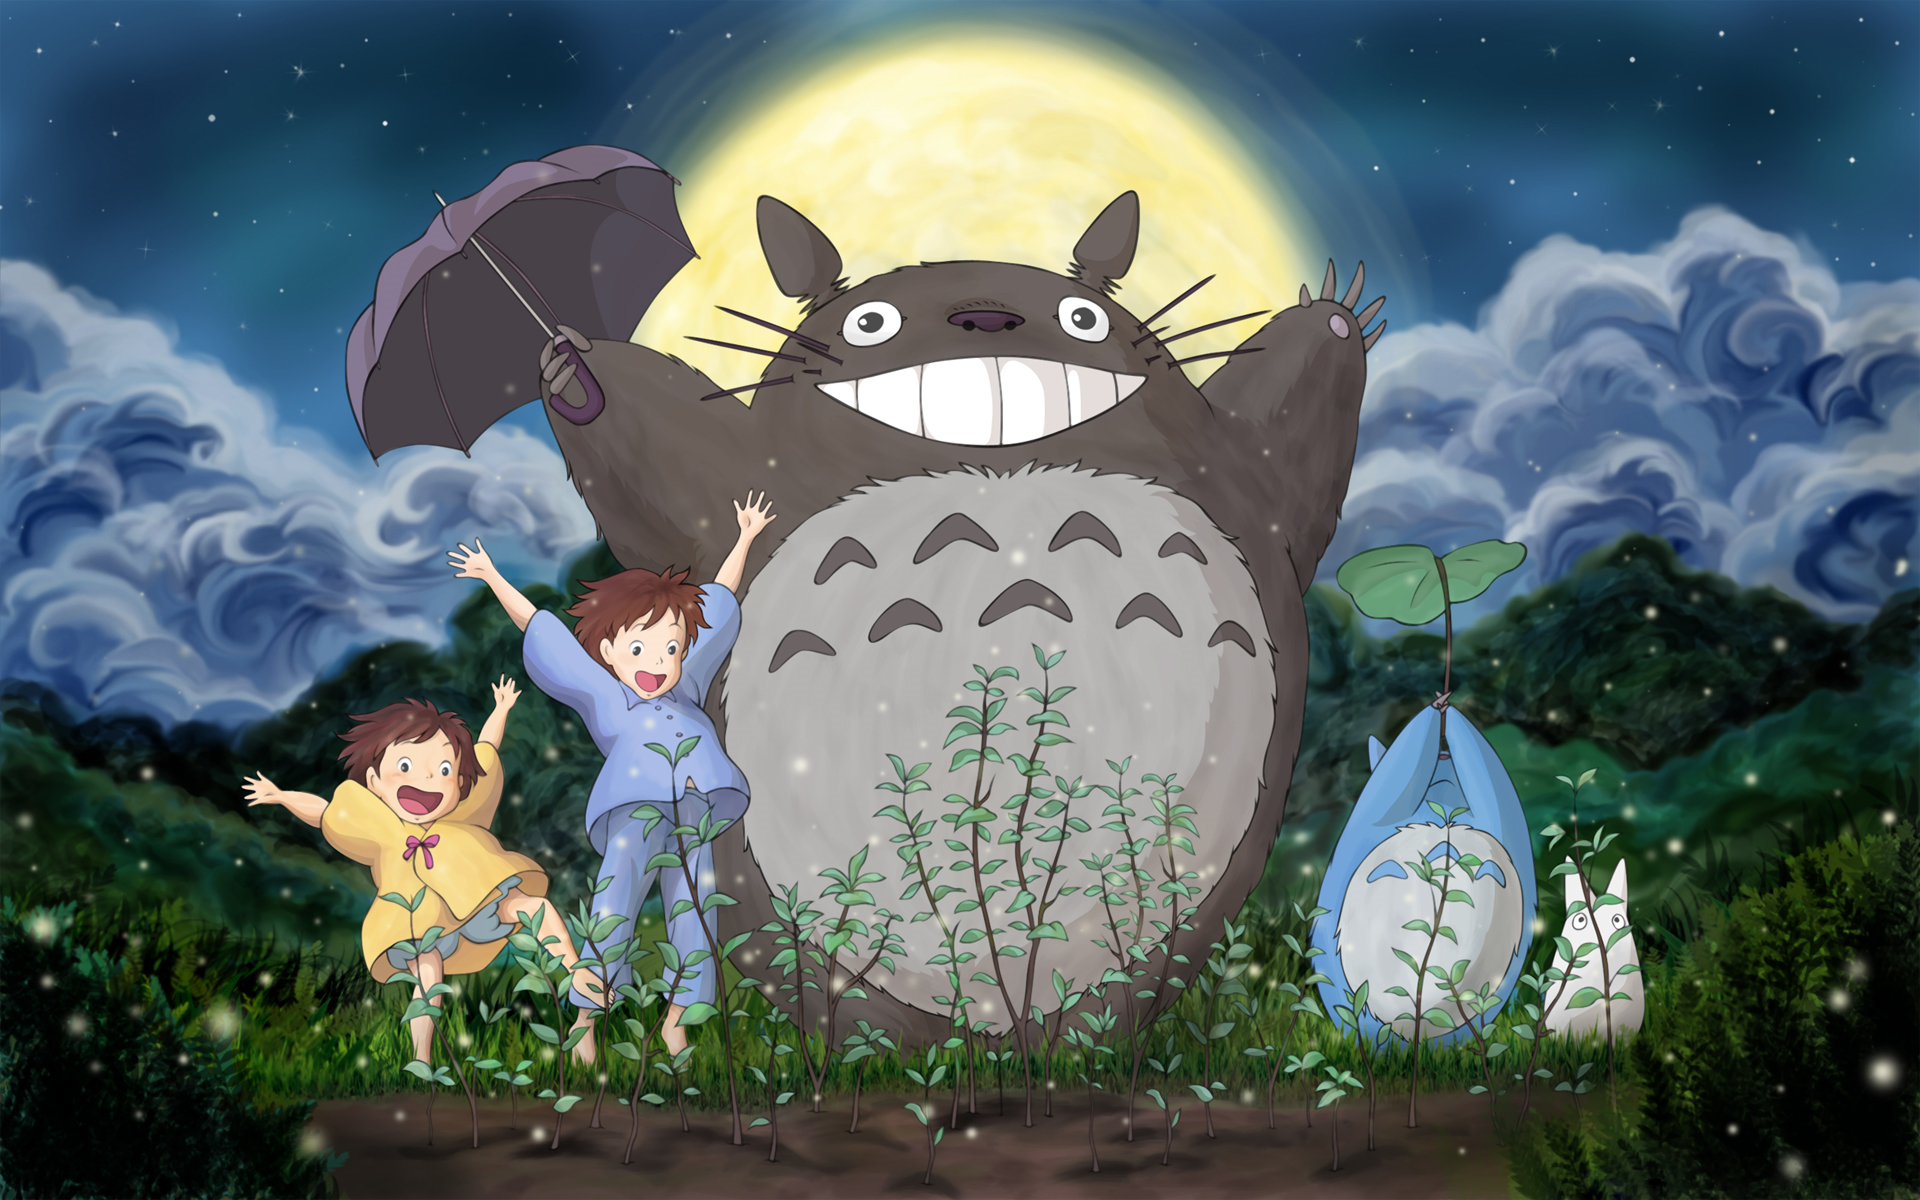 51 My Neighbor Totoro HD Wallpapers | Backgrounds - Wallpaper Abyss